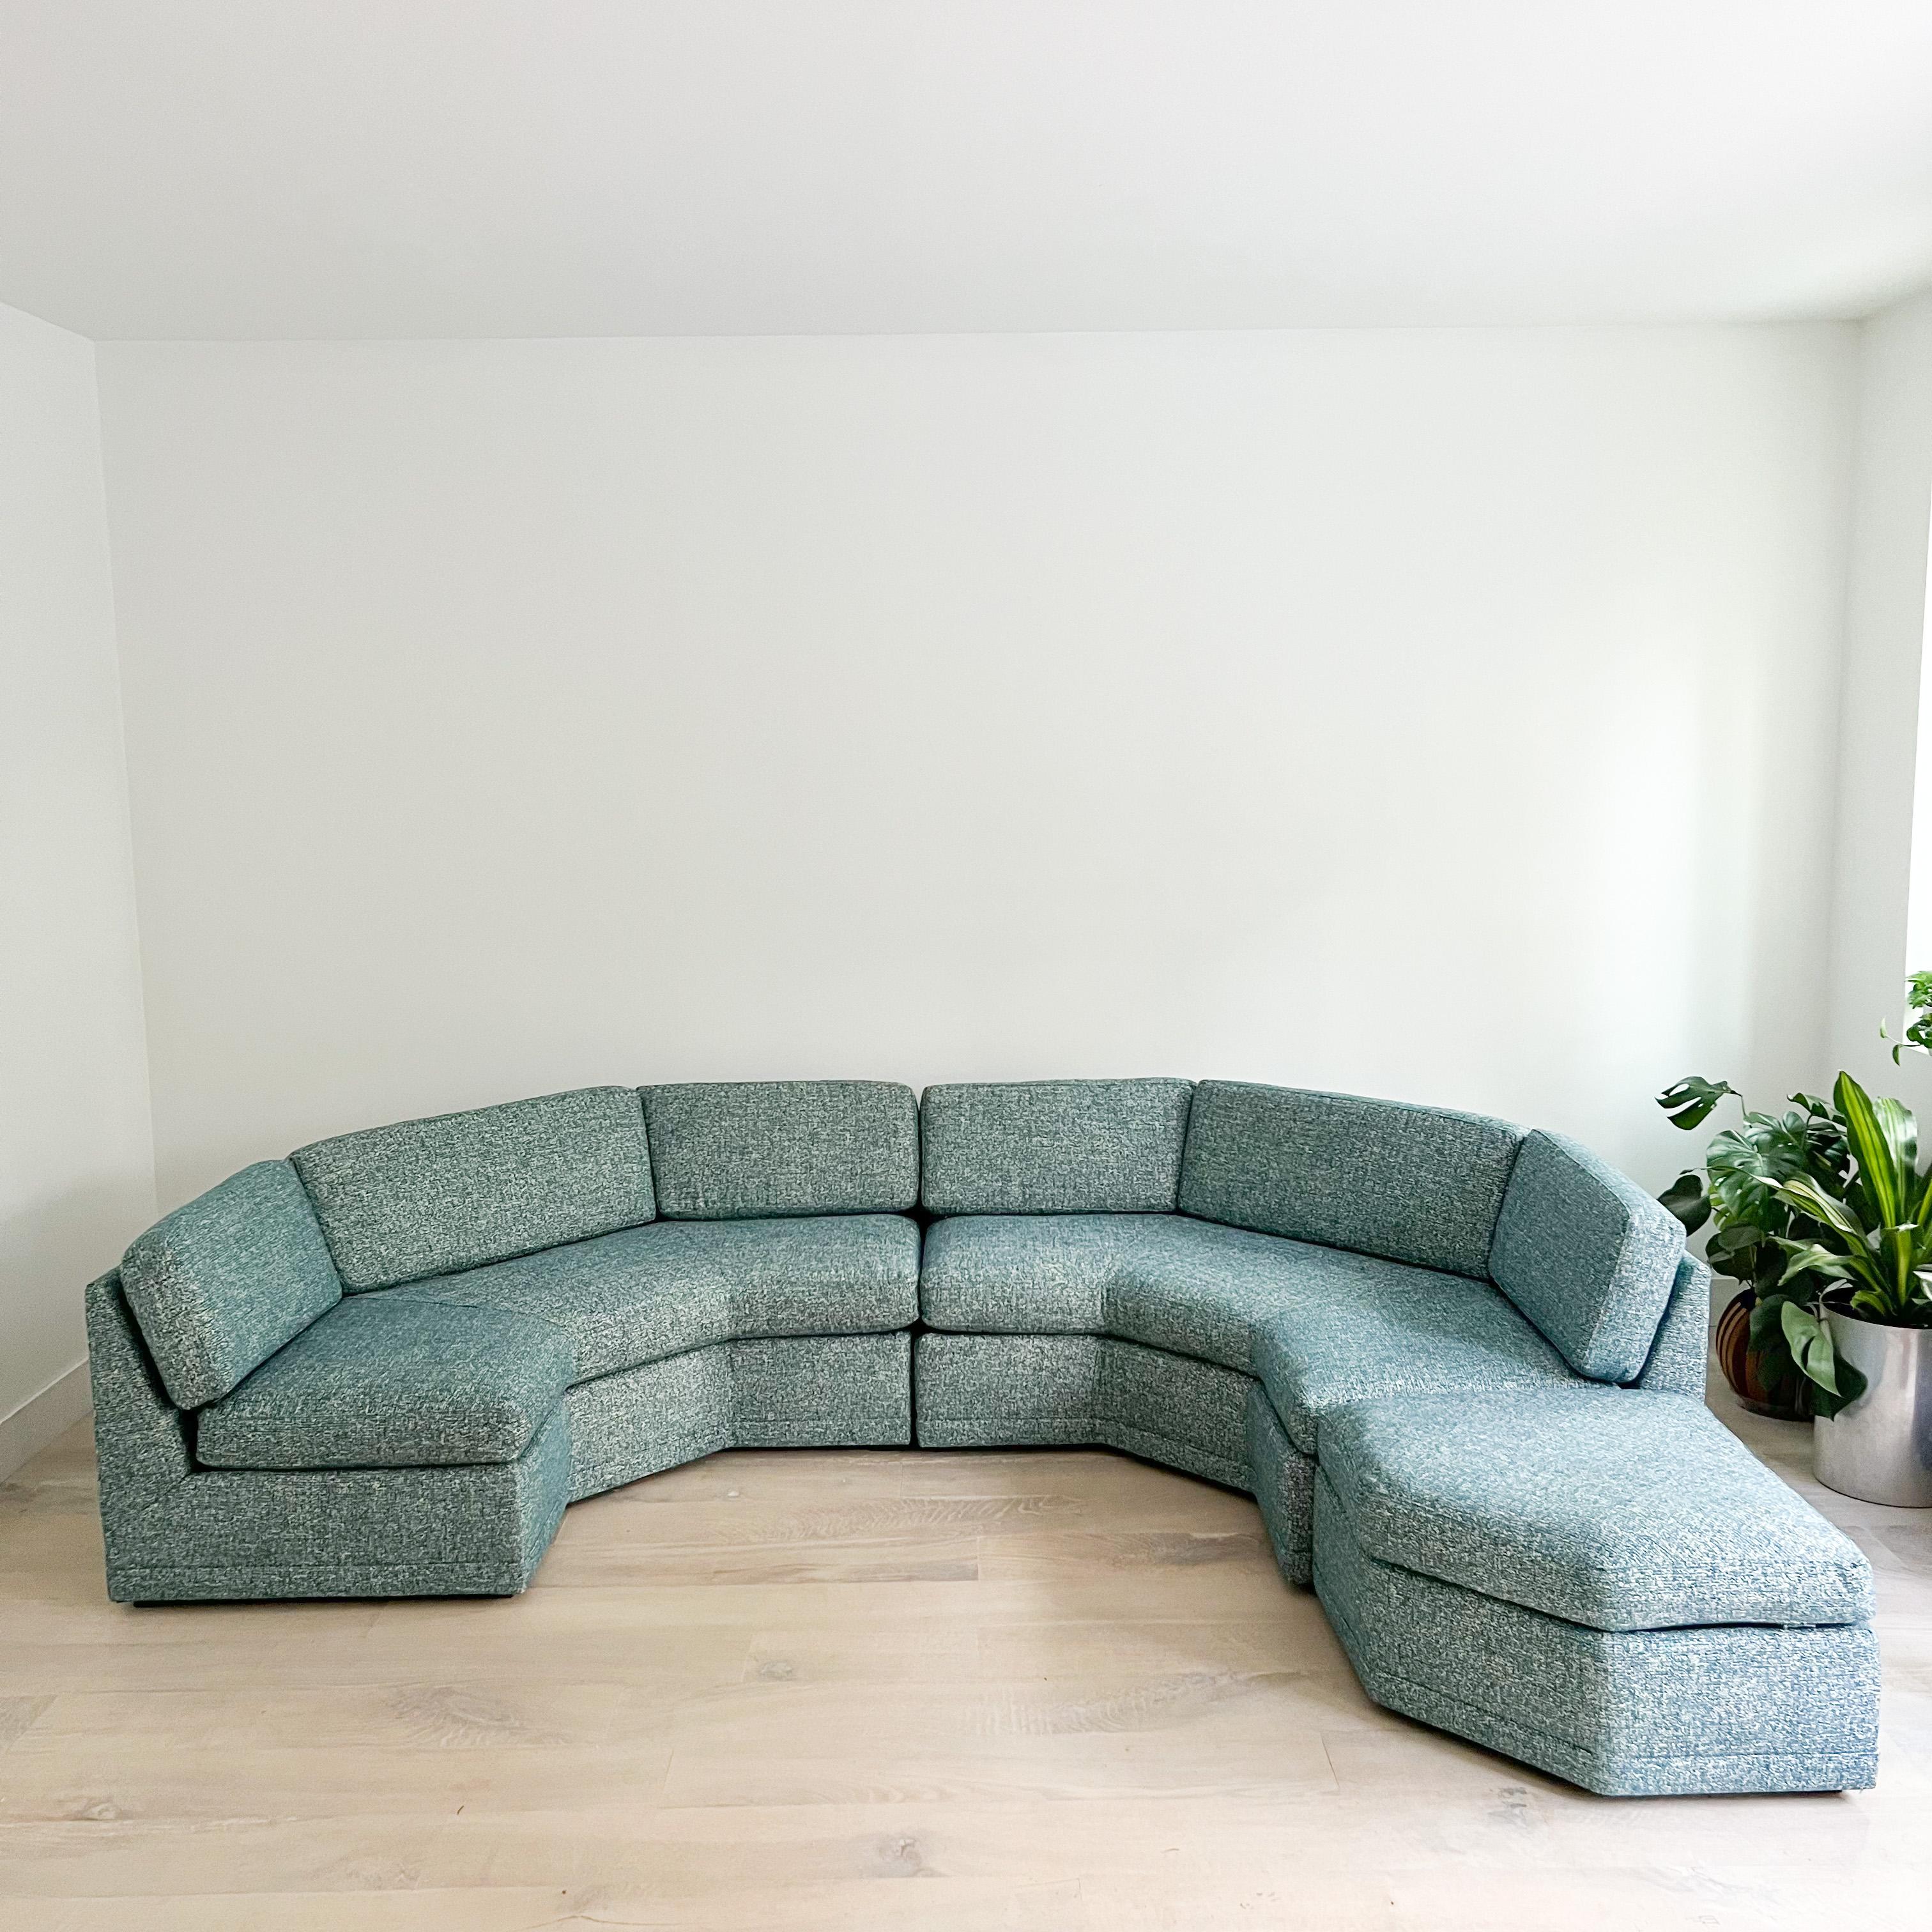 Stunning Mid-Century Modern angular sectional sofa with floating ottoman that can go against either side. New teal tweed upholstery. Great sofa for lounging!

Each 3 sided piece measures -
64” wide
32” high
64” deep
17.5”SH

Ottoman